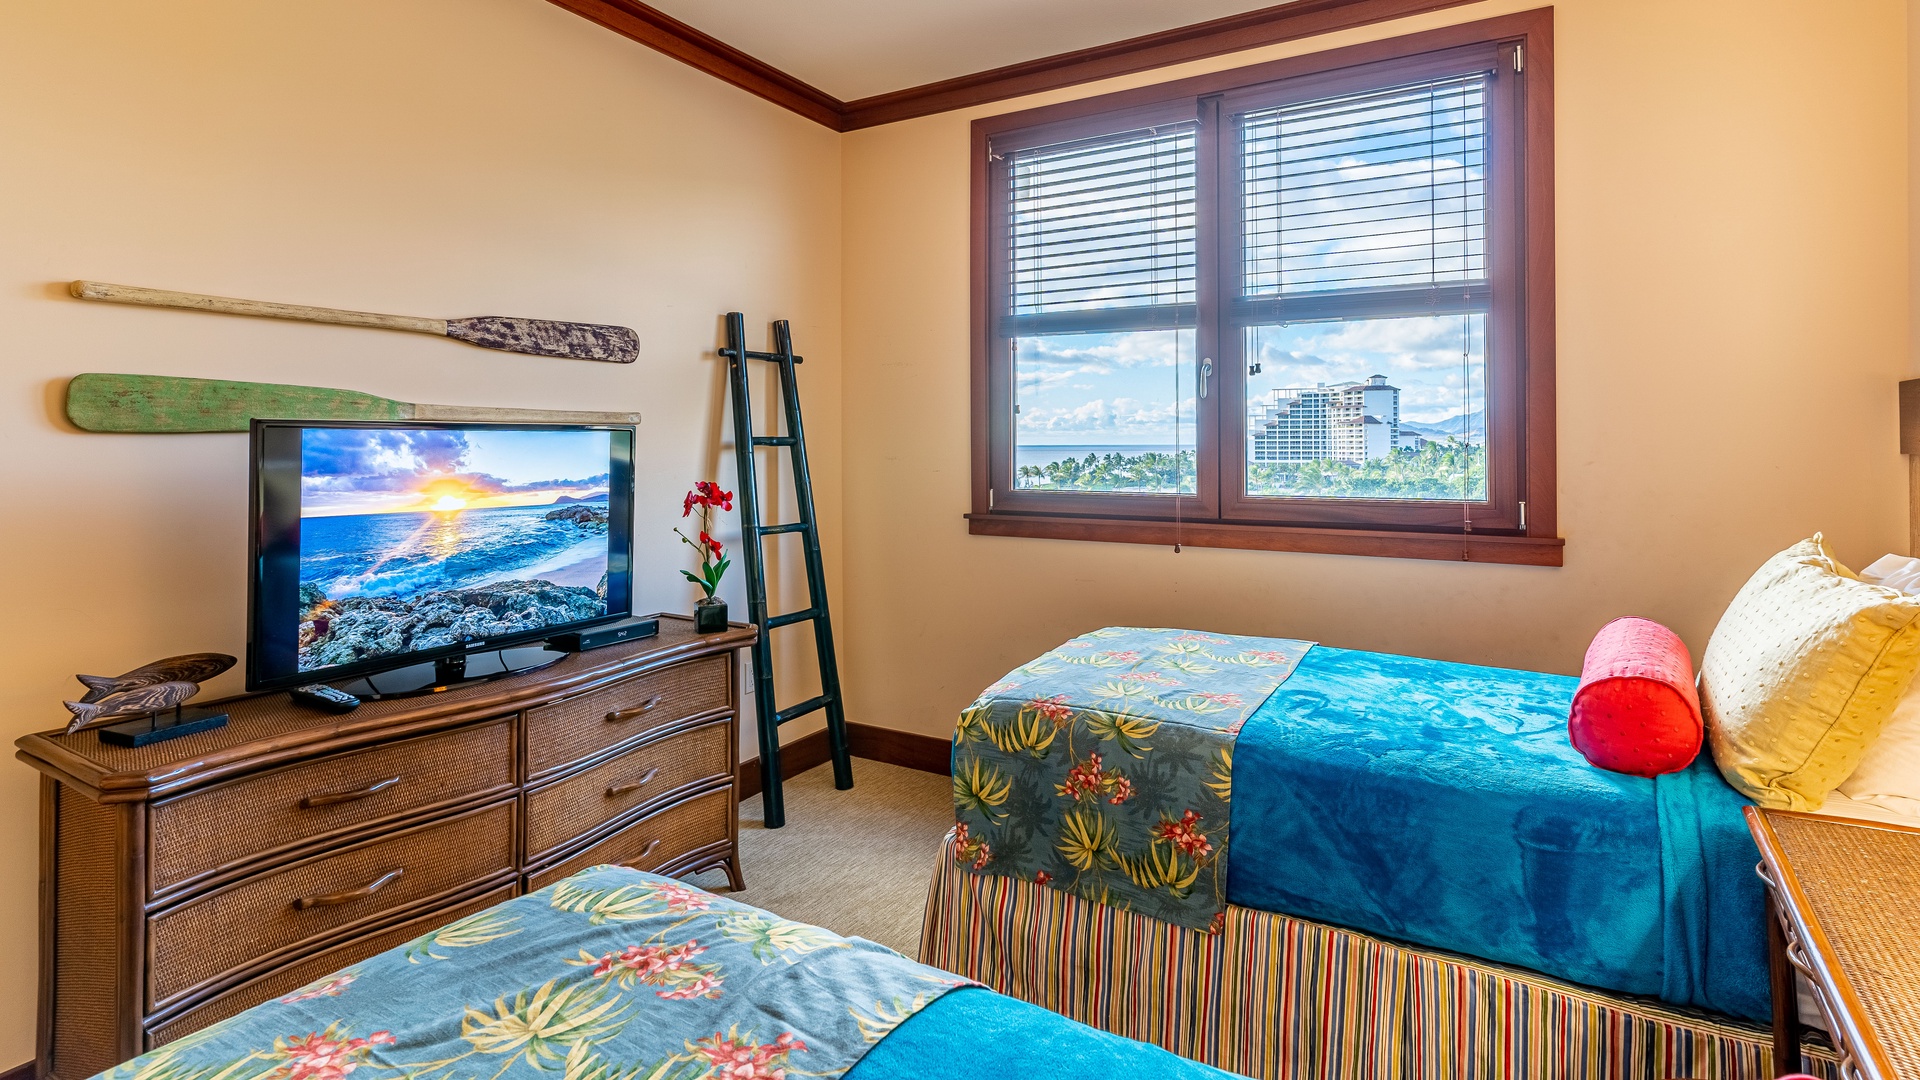 Kapolei Vacation Rentals, Ko Olina Beach Villas B706 - The second guest bedroom features bright patterns and a smart TV.